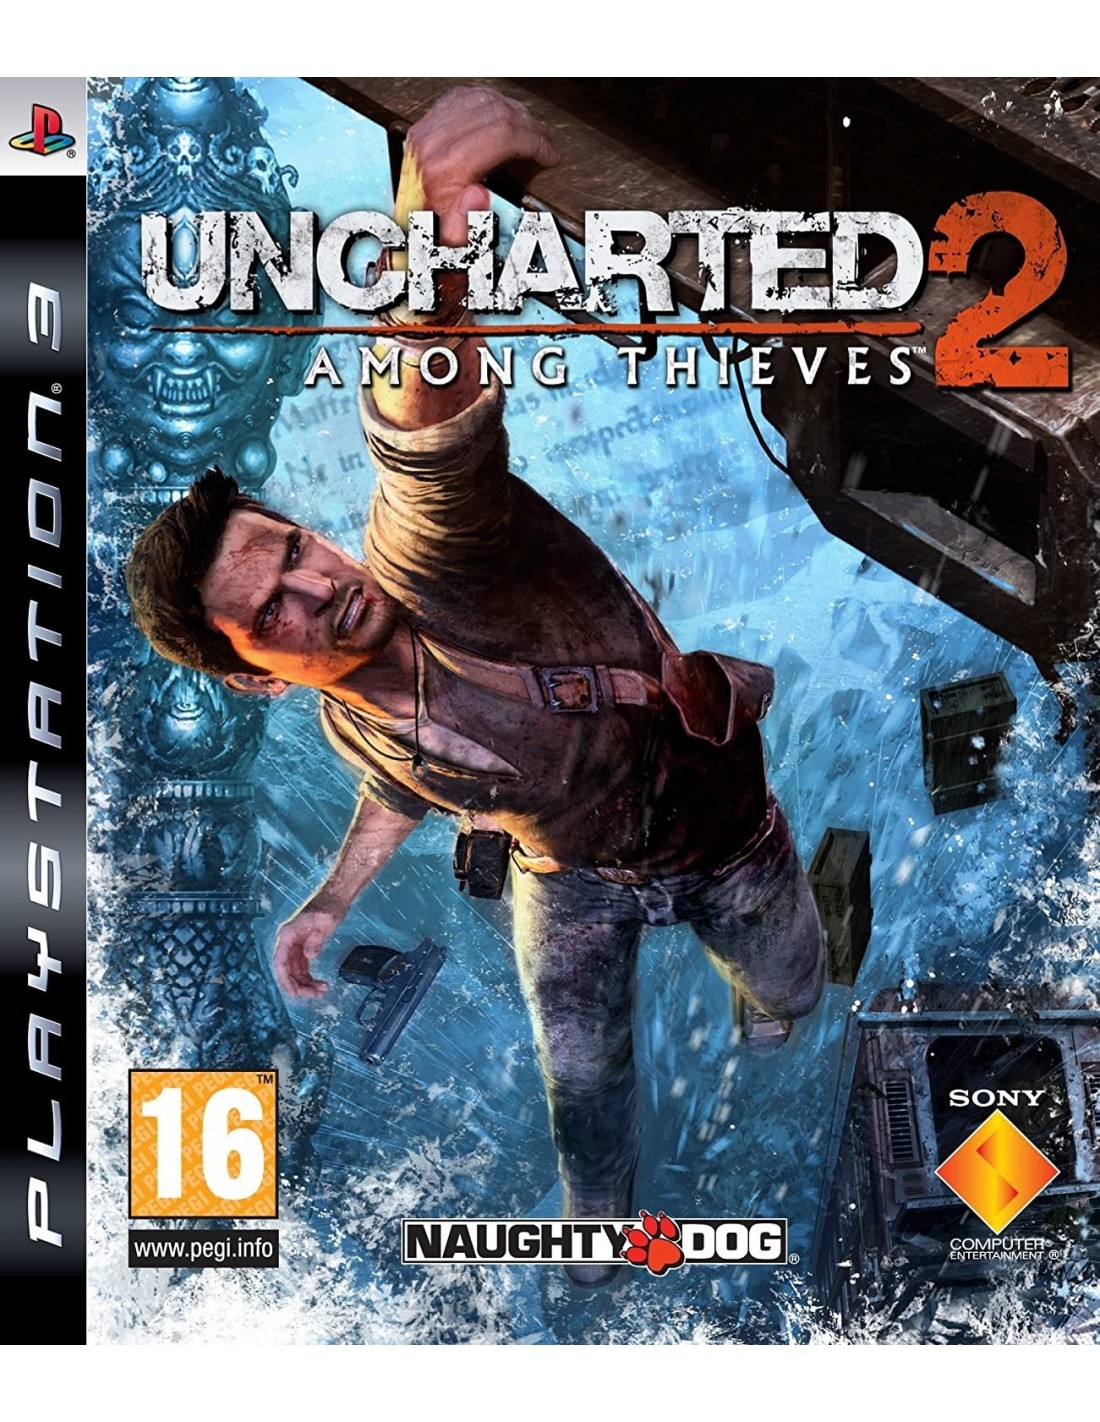 UNCHARTED 2 AMONG THIEVES - B1045